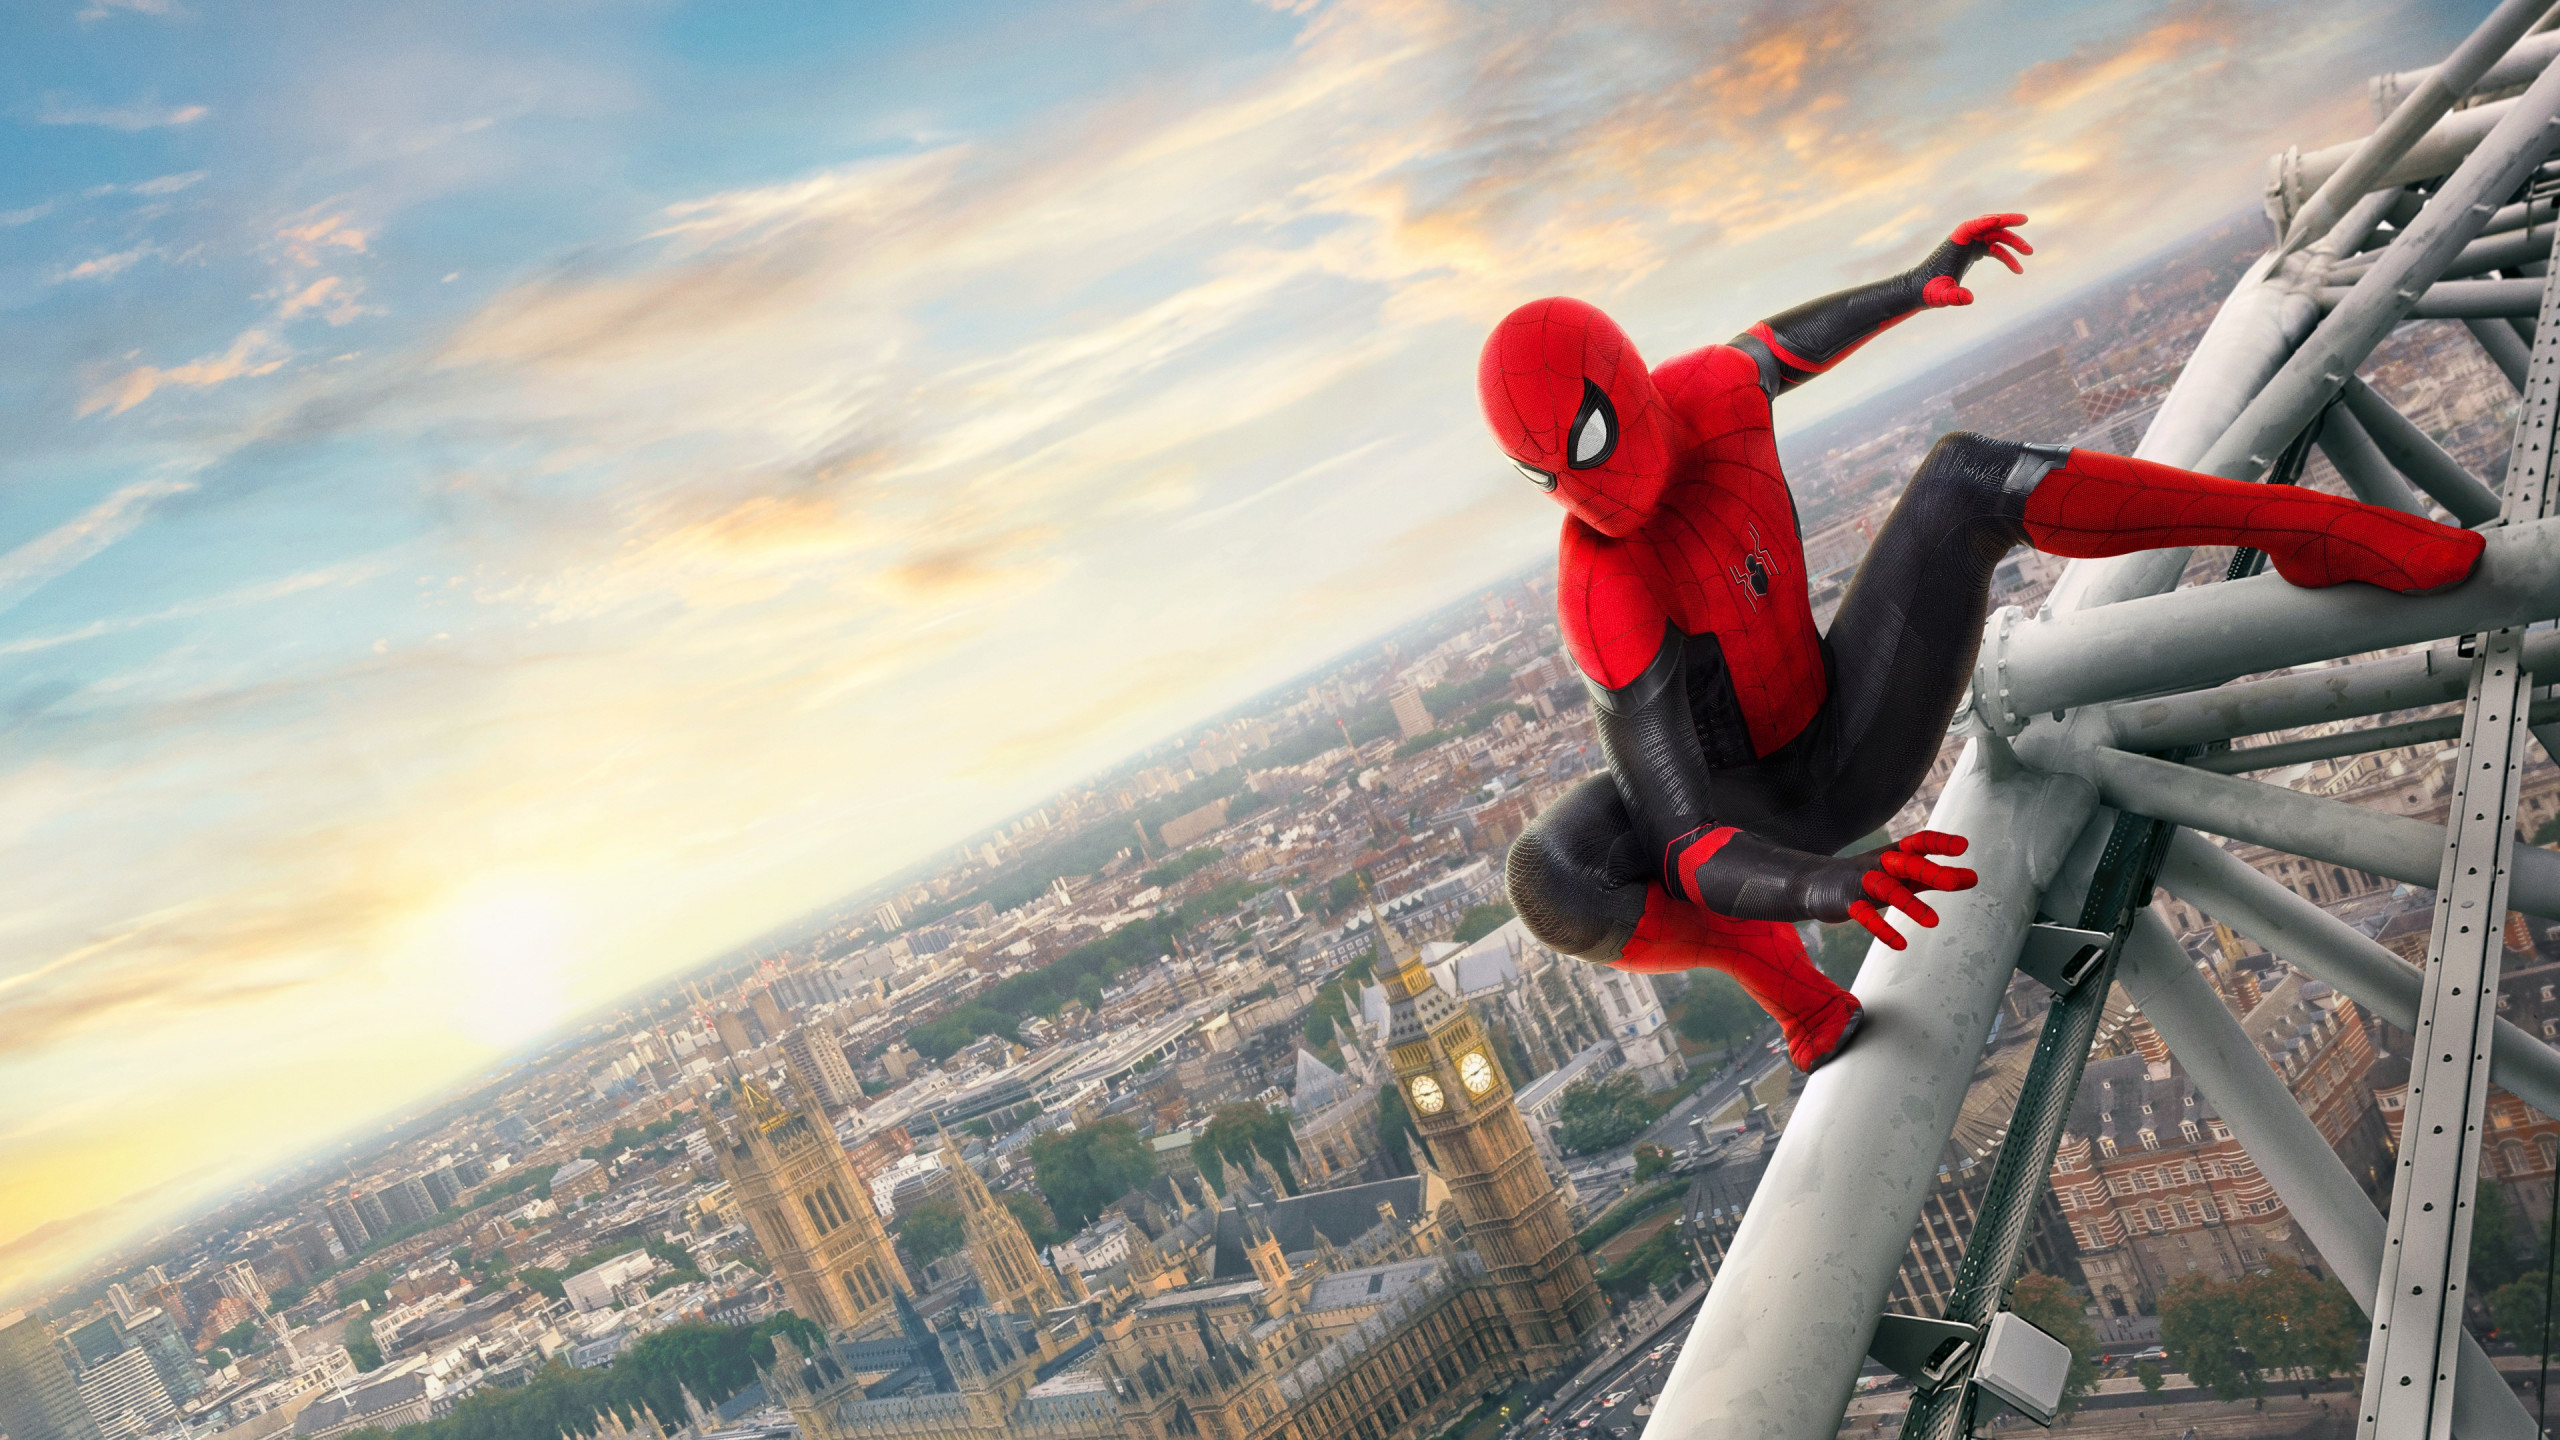 Spider Man: Far From Home 2019 wallpaper 2560x1440